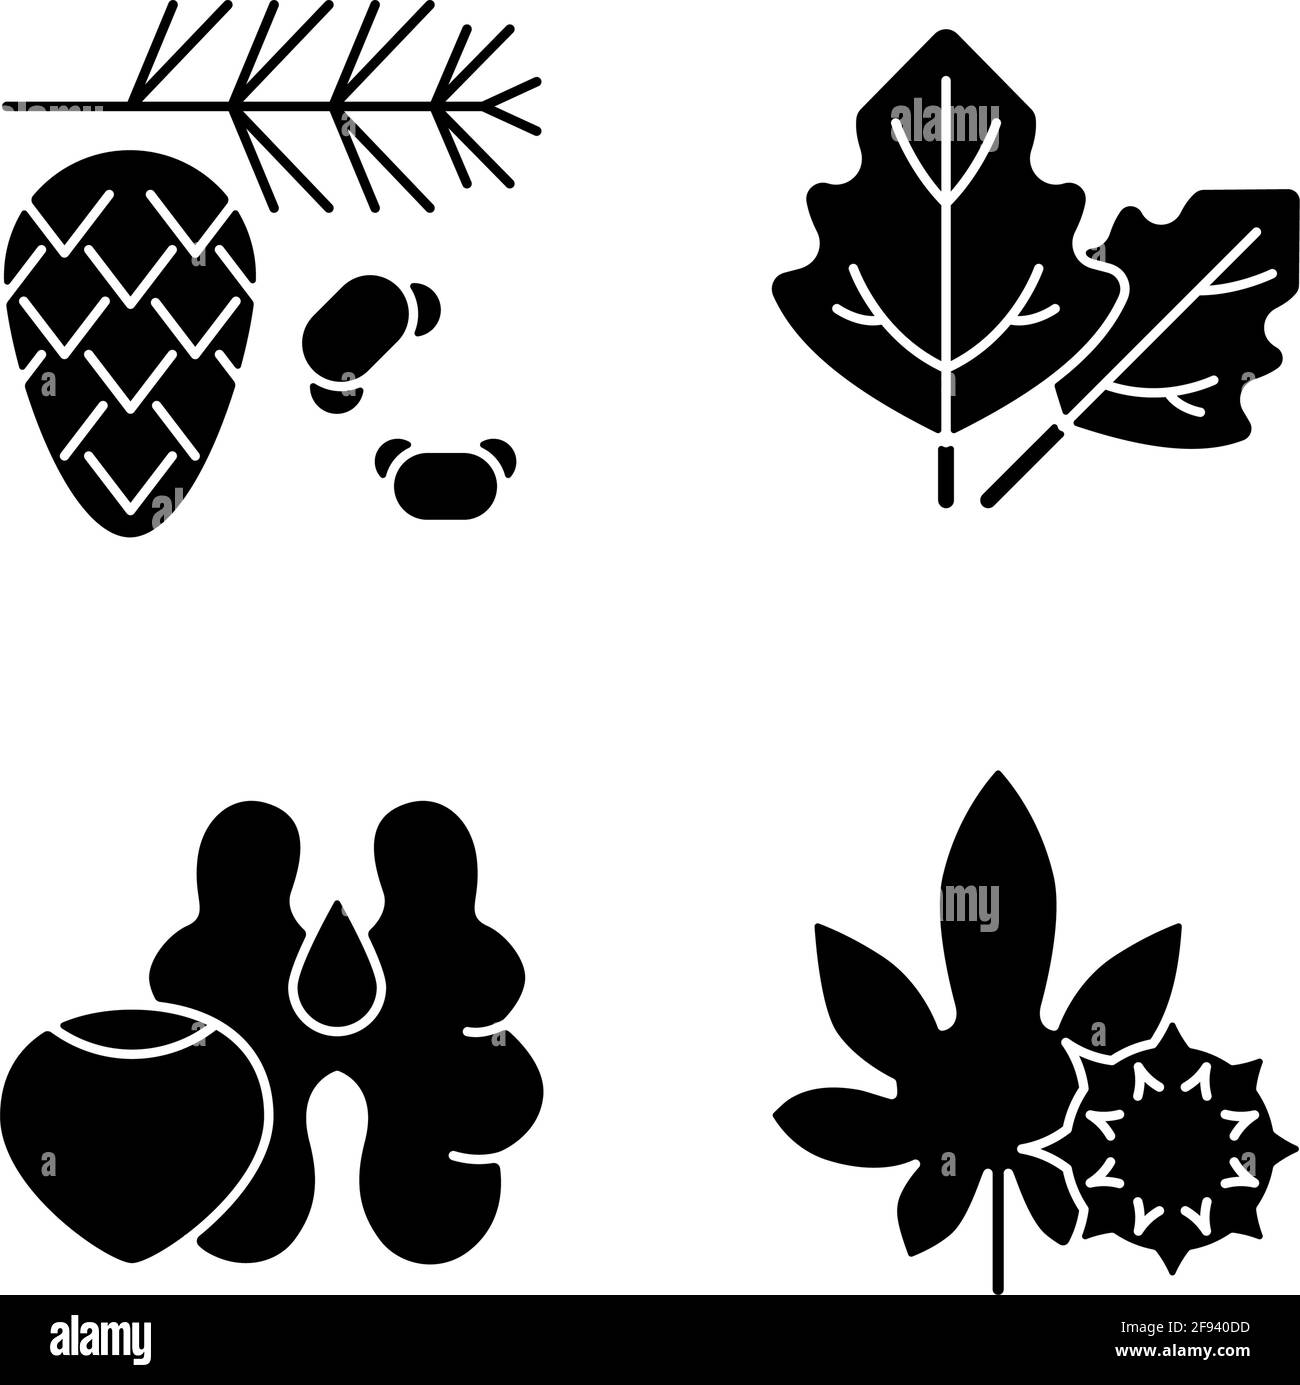 Cause of allergic reaction black glyph icons set on white space Stock Vector